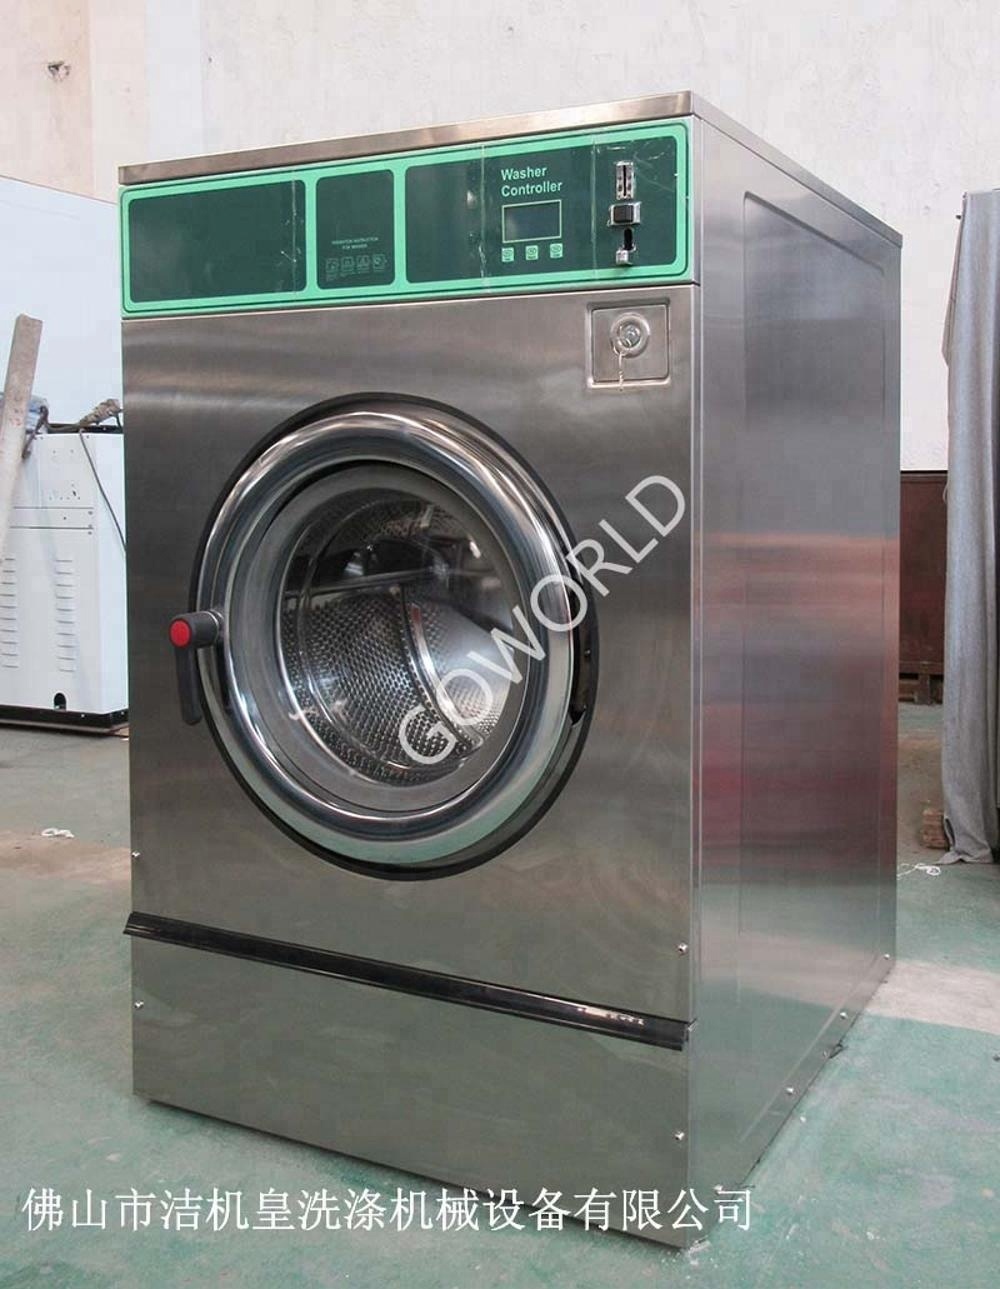 12kg commercial washing machine for laundry shop